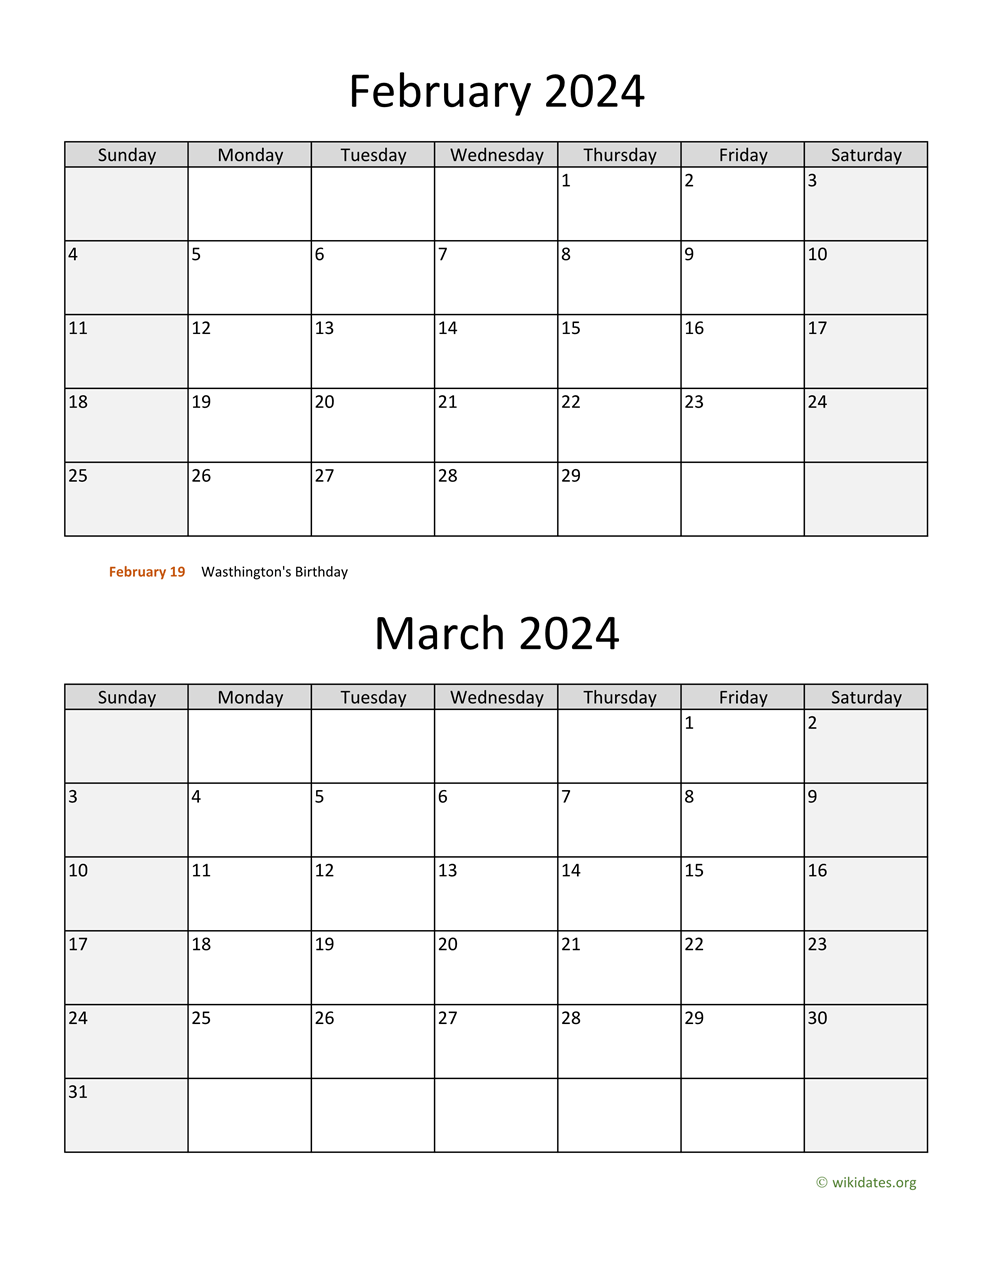 February And March 2024 Calendar | Wikidates for February And March 2024 Calendar Printable